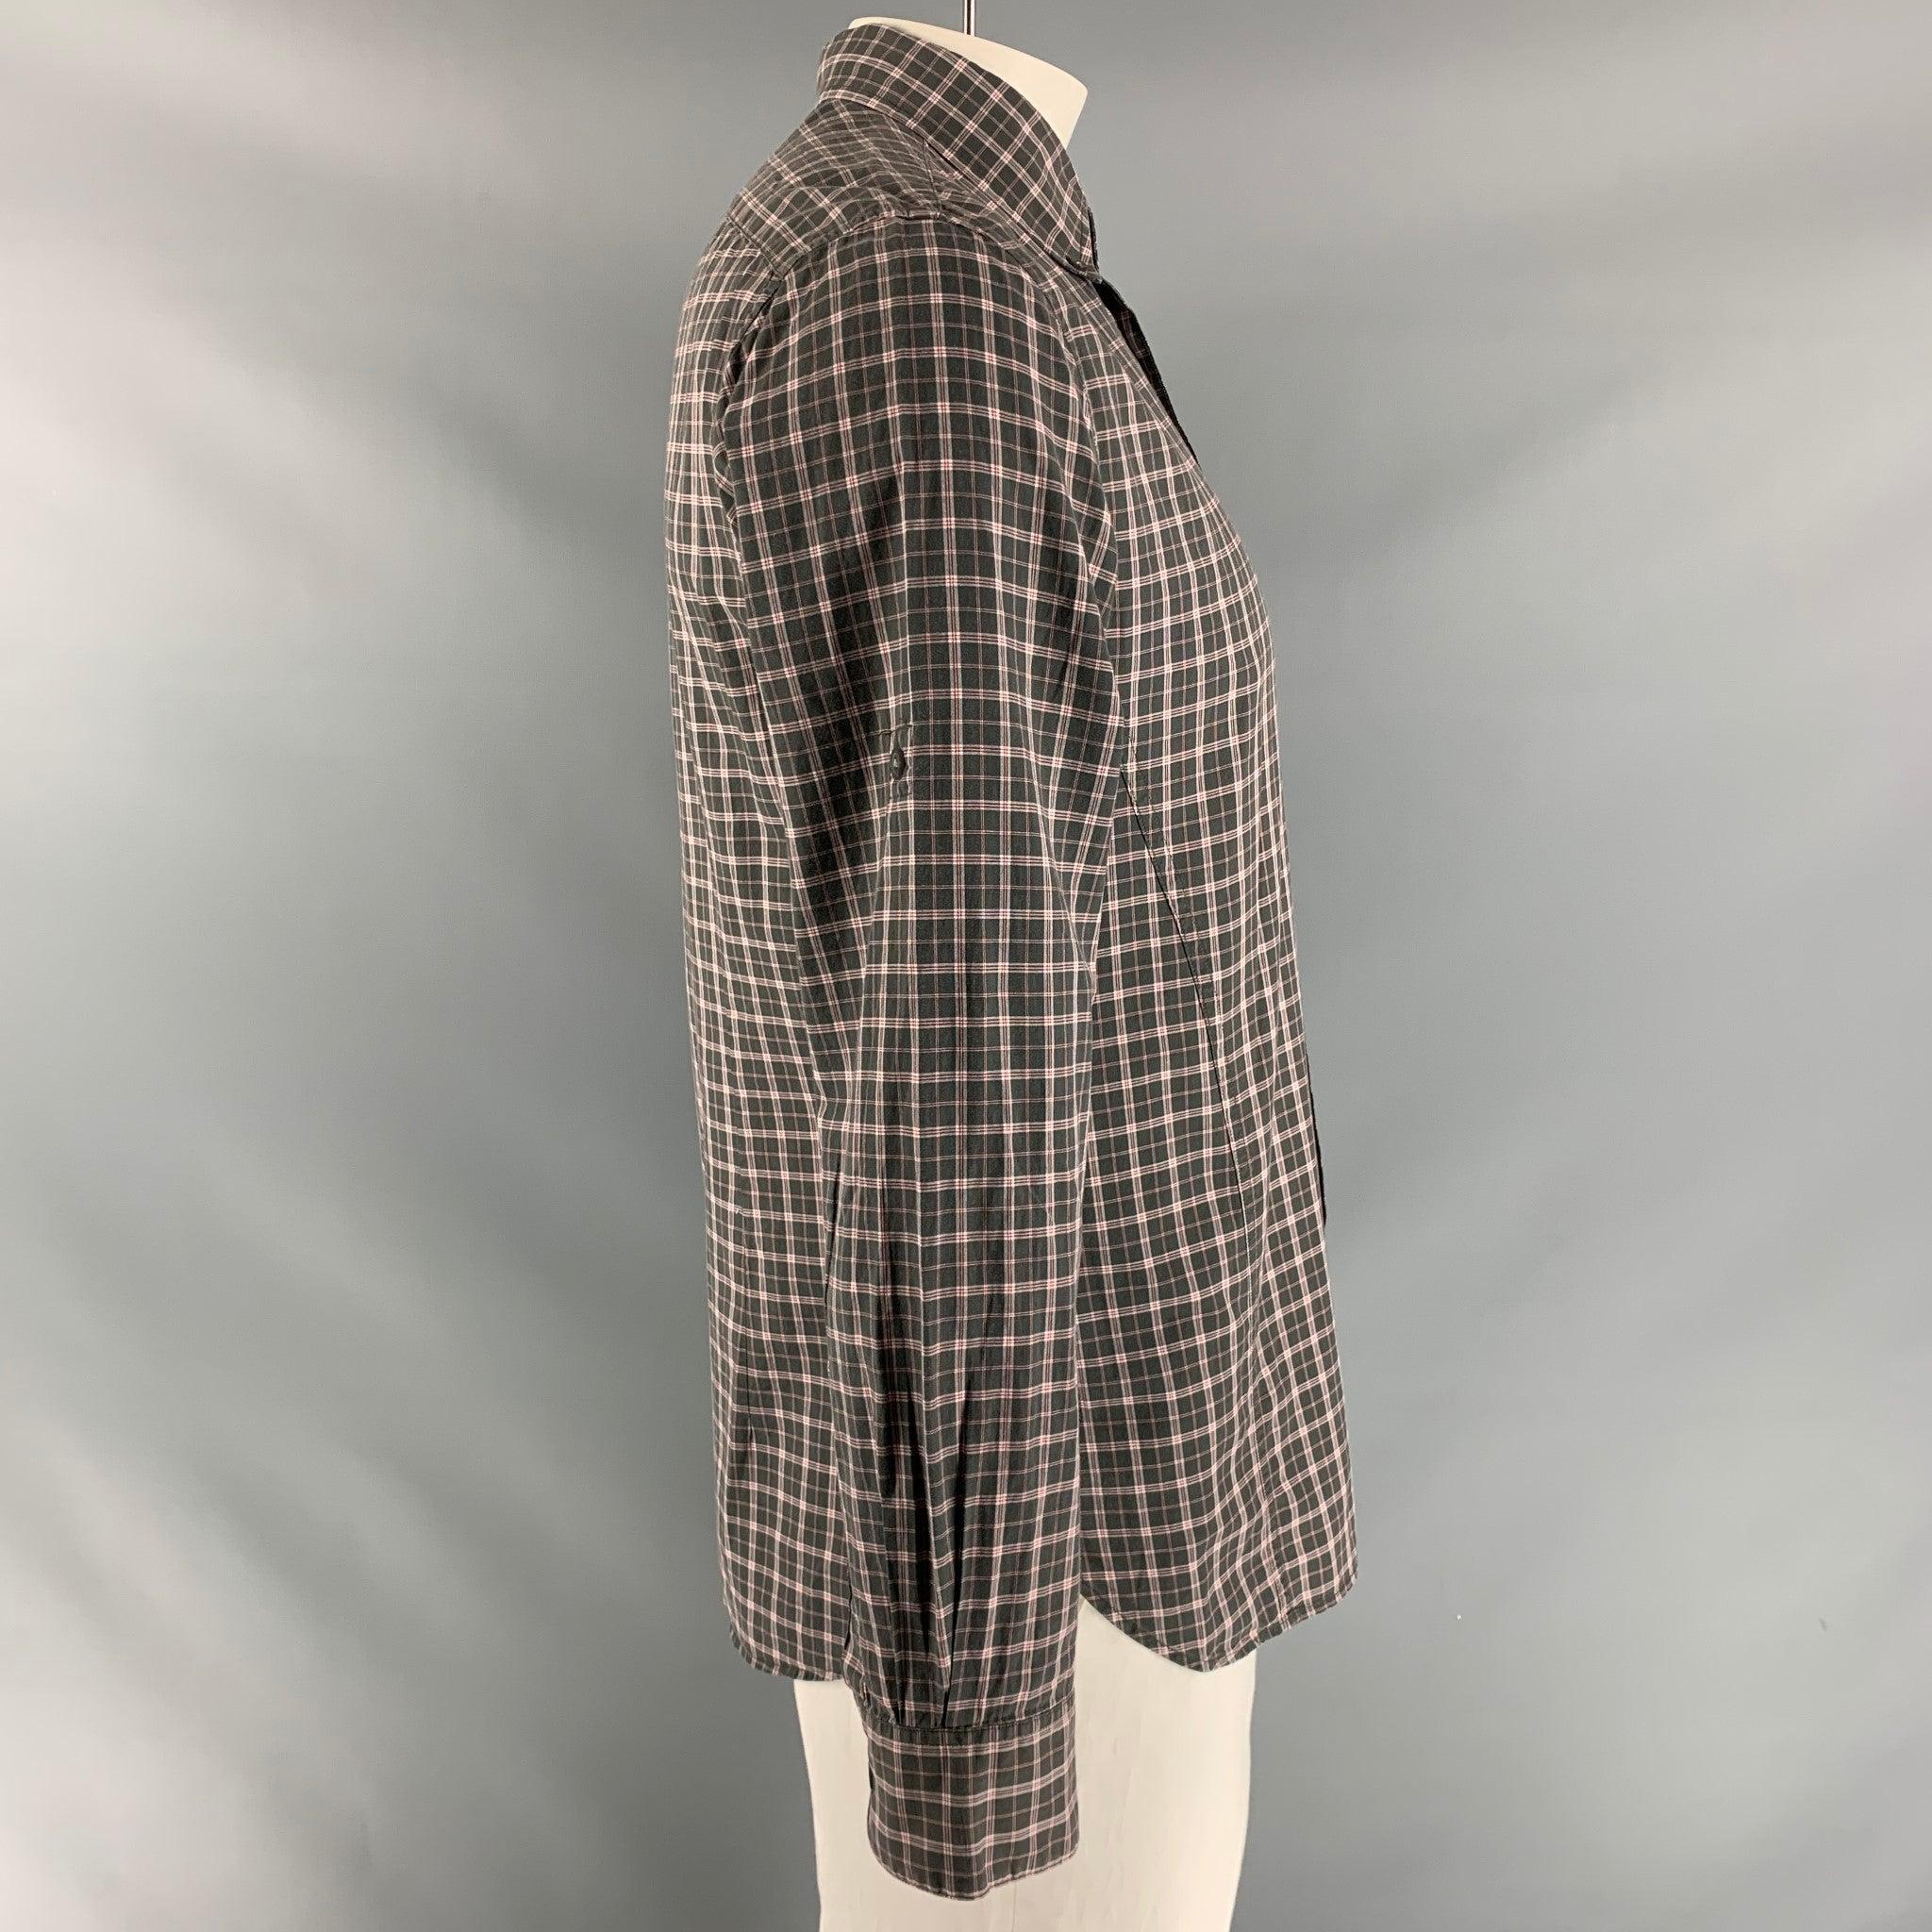 JOHN VARVATOS long sleeve shirt comes in charcoal and red plaid cotton featuring a patch pocket at left front panel, button down collar, one button round cuff, and button up closure. Excellent Pre-Owned Condition.  

Marked:   M 

Measurements: 
